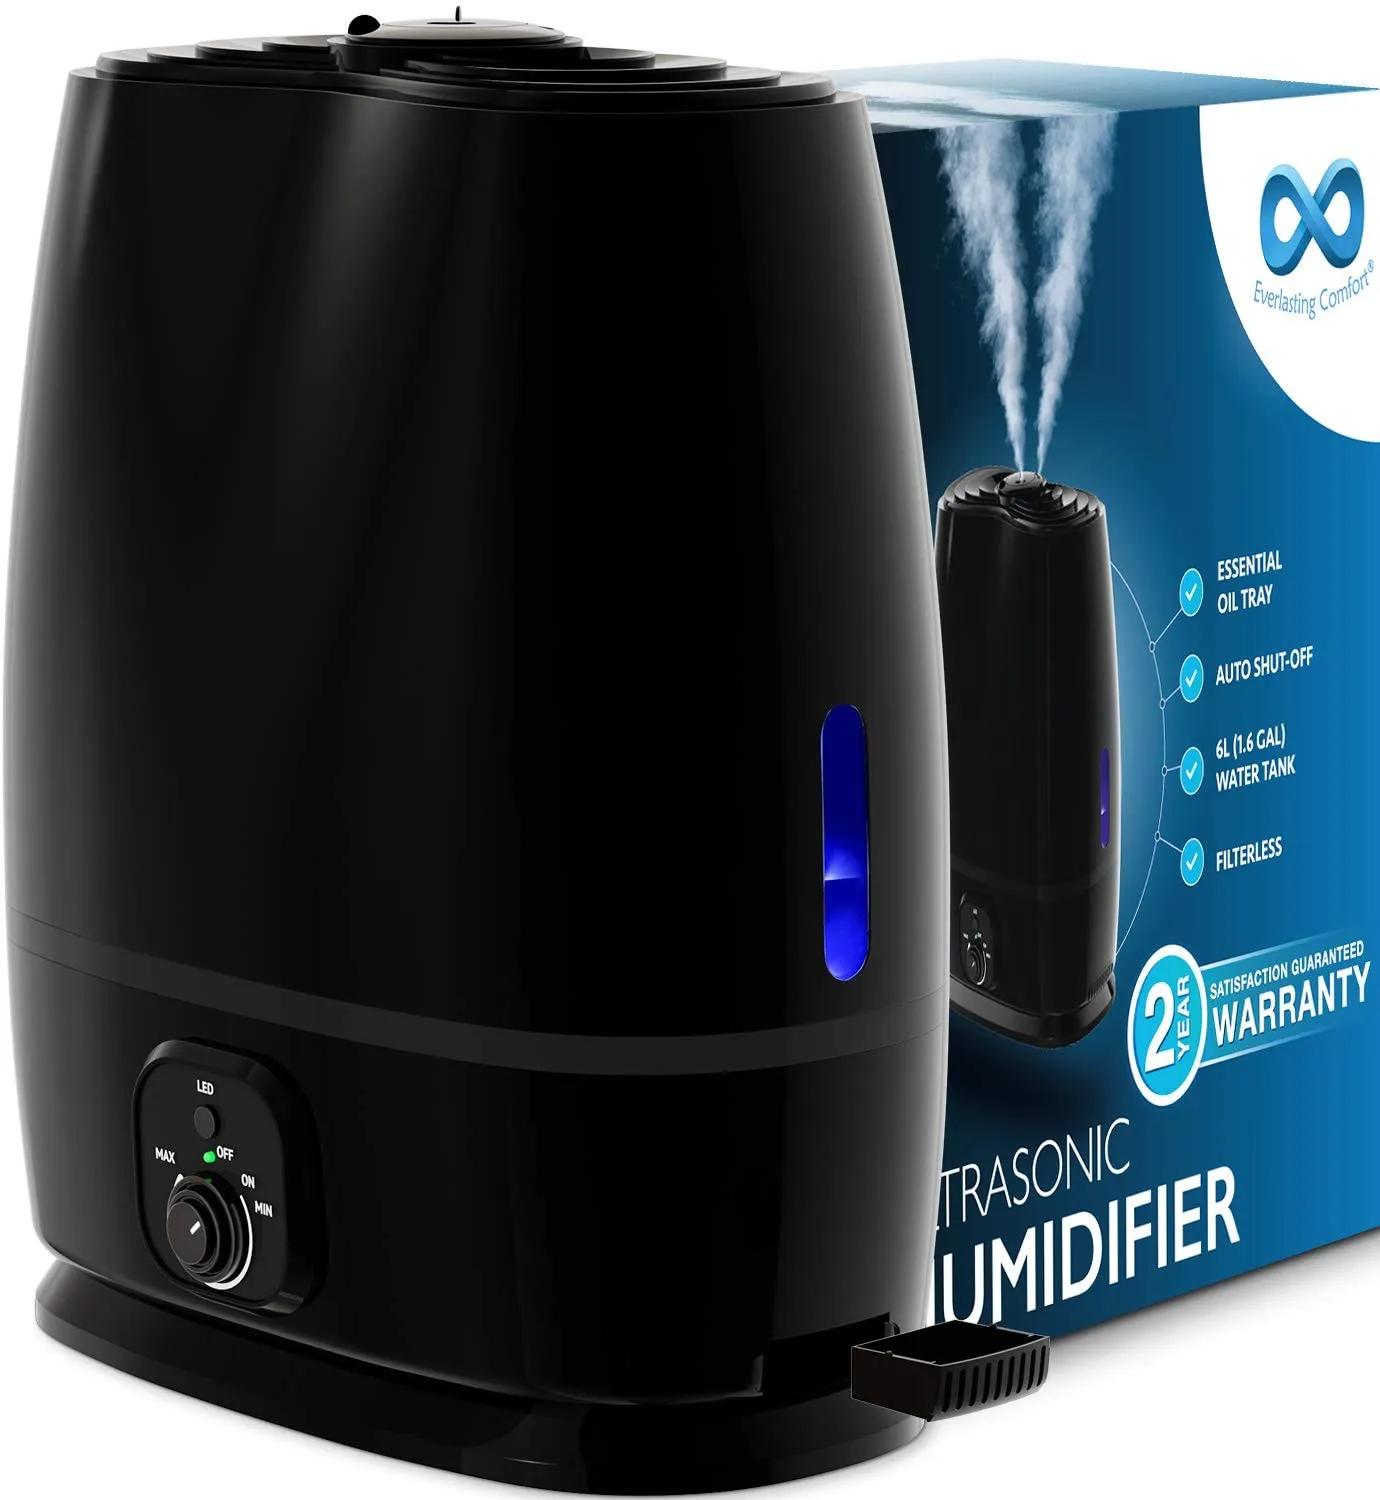 Comfort Humidifiers for home office with essential oil tray to make your workspace even more relaxing and enjoyable.